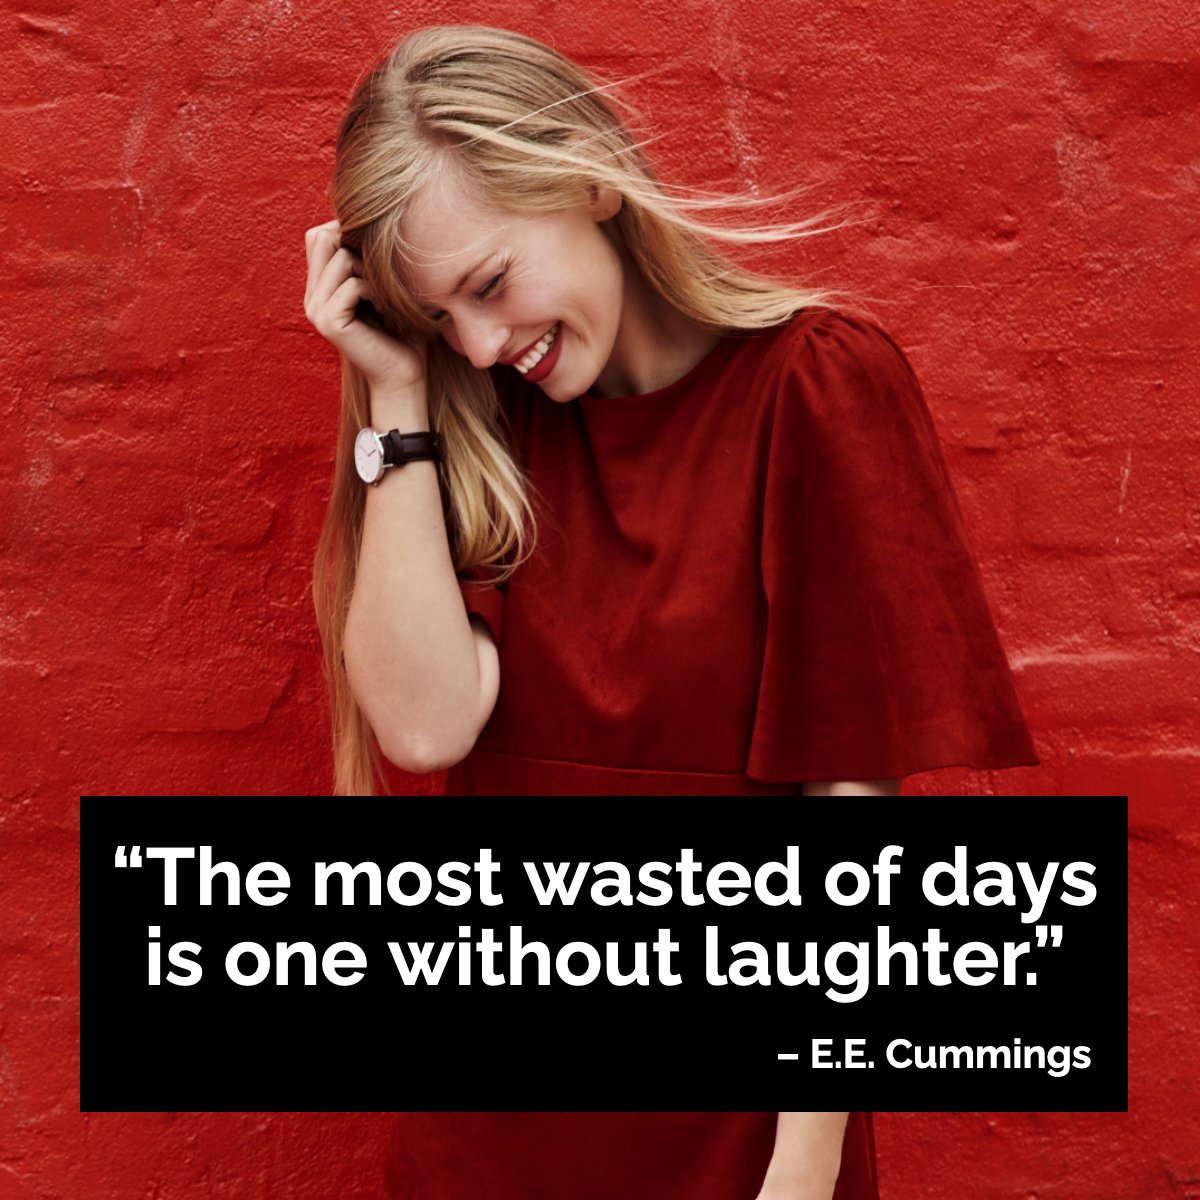 Laughter is one of the most valuable things in your life. 💯

#wisdomquote #wisdomoftheday #quotegram #quoteoftheday  #eecummings
 #thestonesrealestate #johnstone #Fresnohomes #clovishomes #letmebeyourrealtor #bestrealestateagentinfresno #bestrealestateagentinclovis